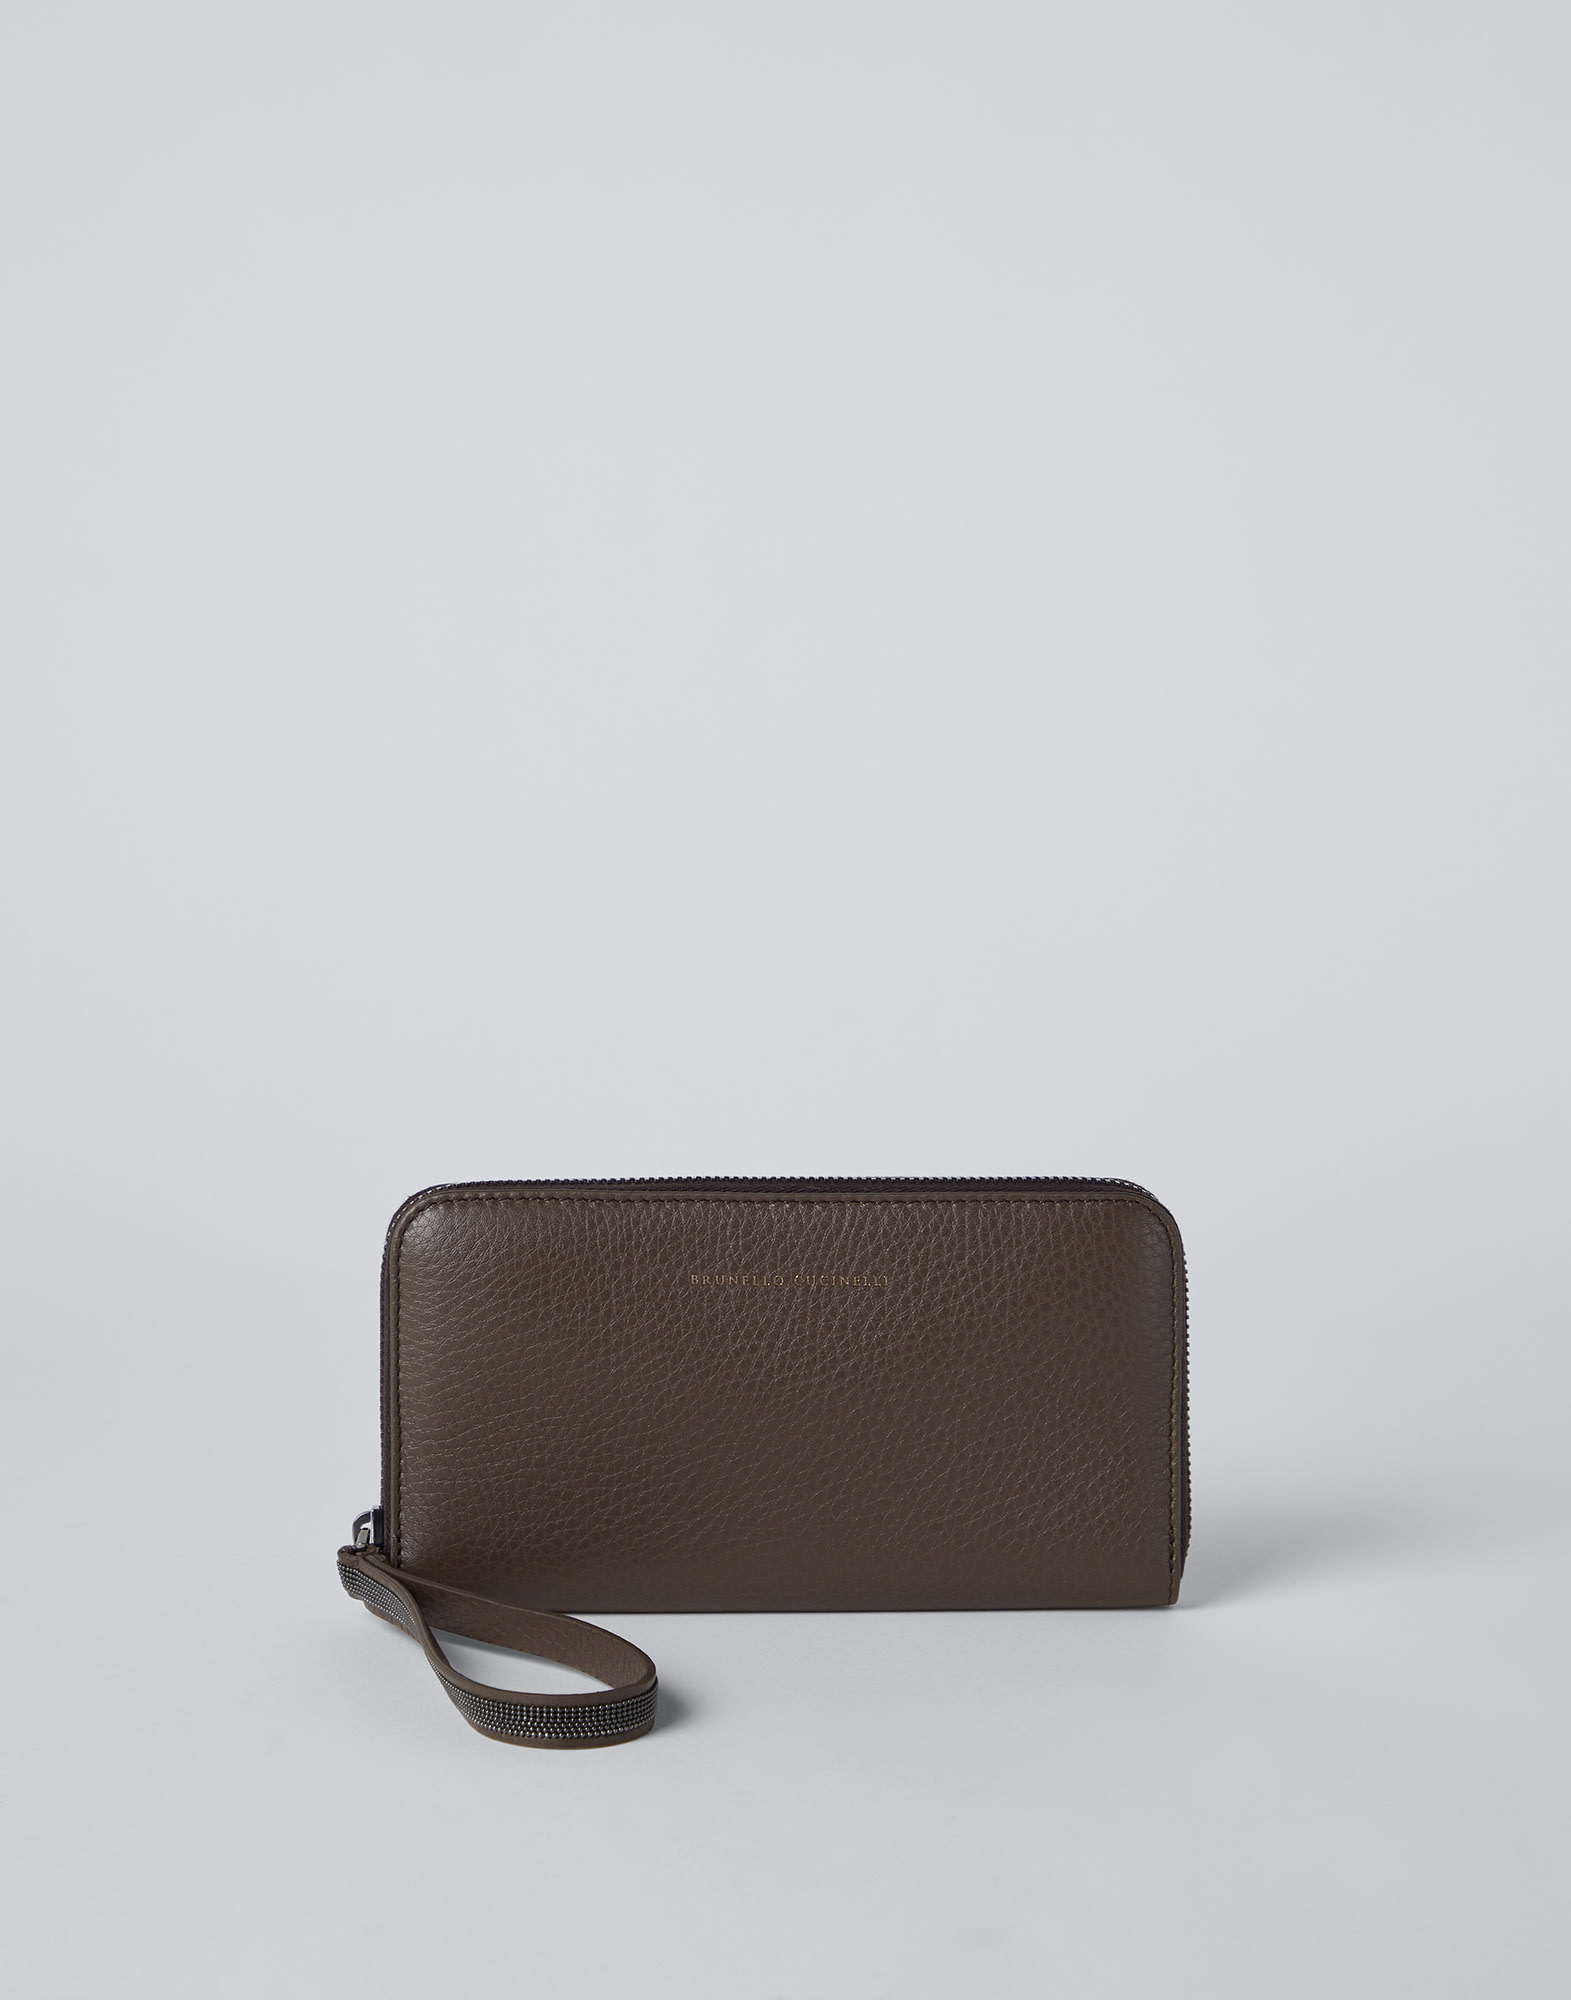 Women's wallets and small leather goods | Brunello Cucinelli